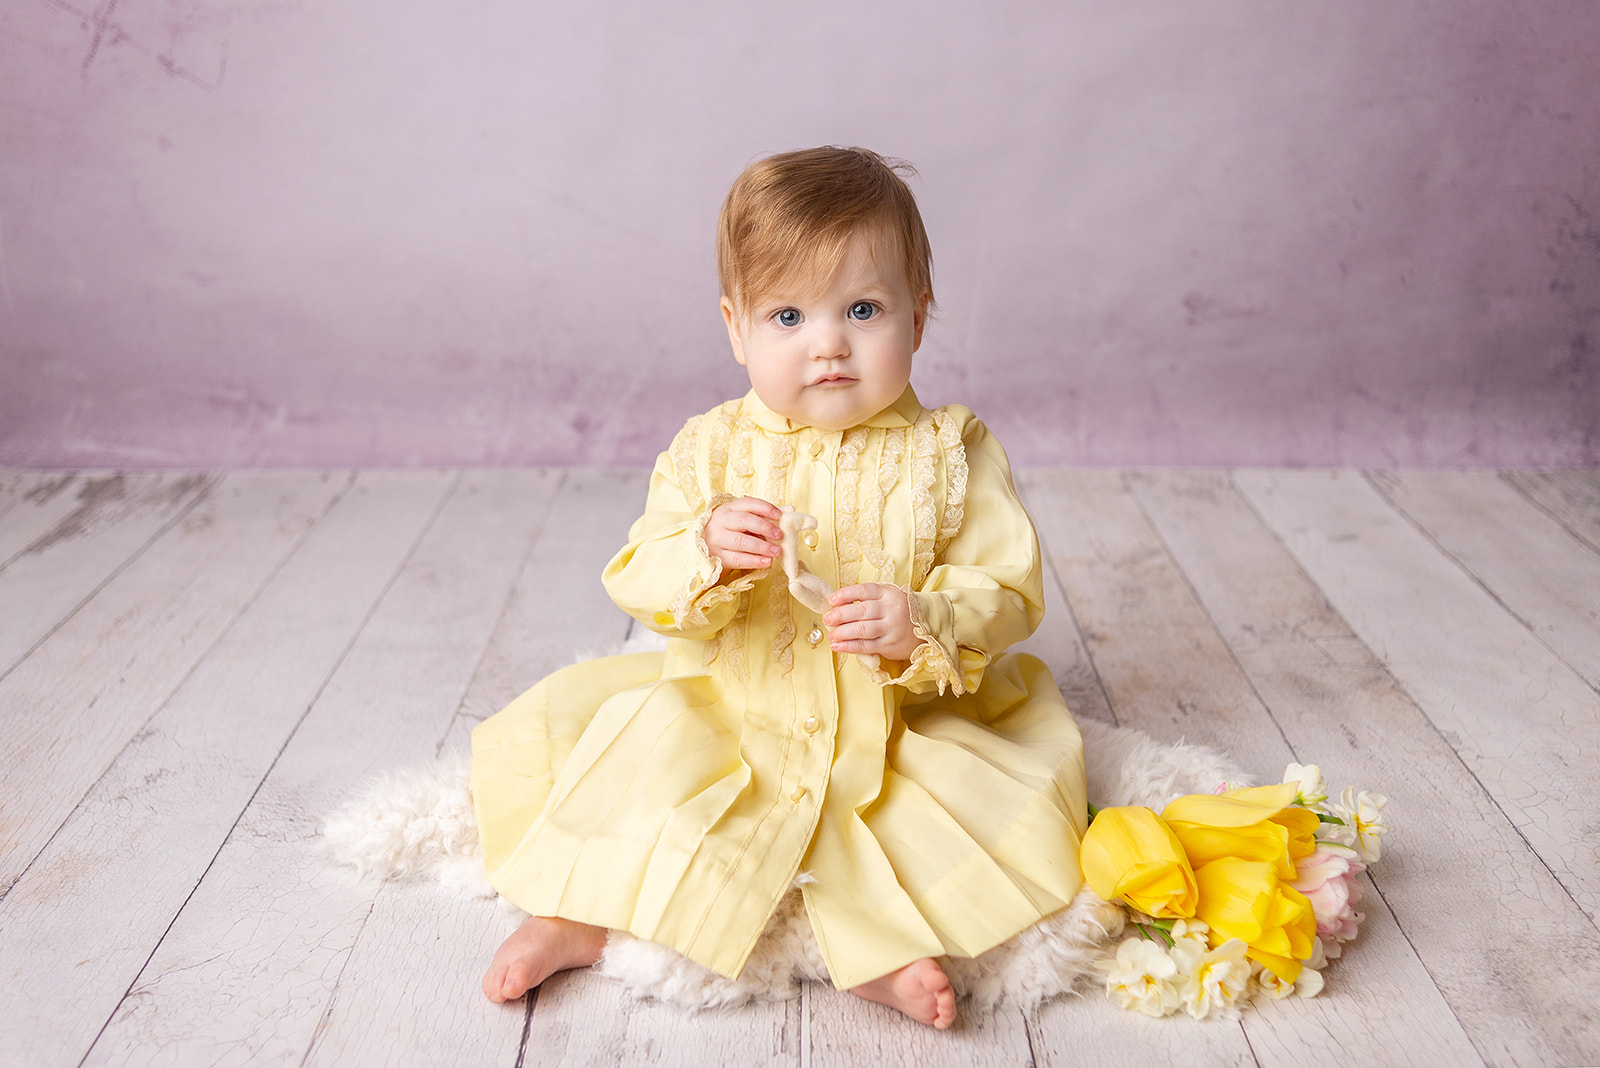 A one year old baby girl milestone session with a purple backdrop and a yellow family heirloom dress